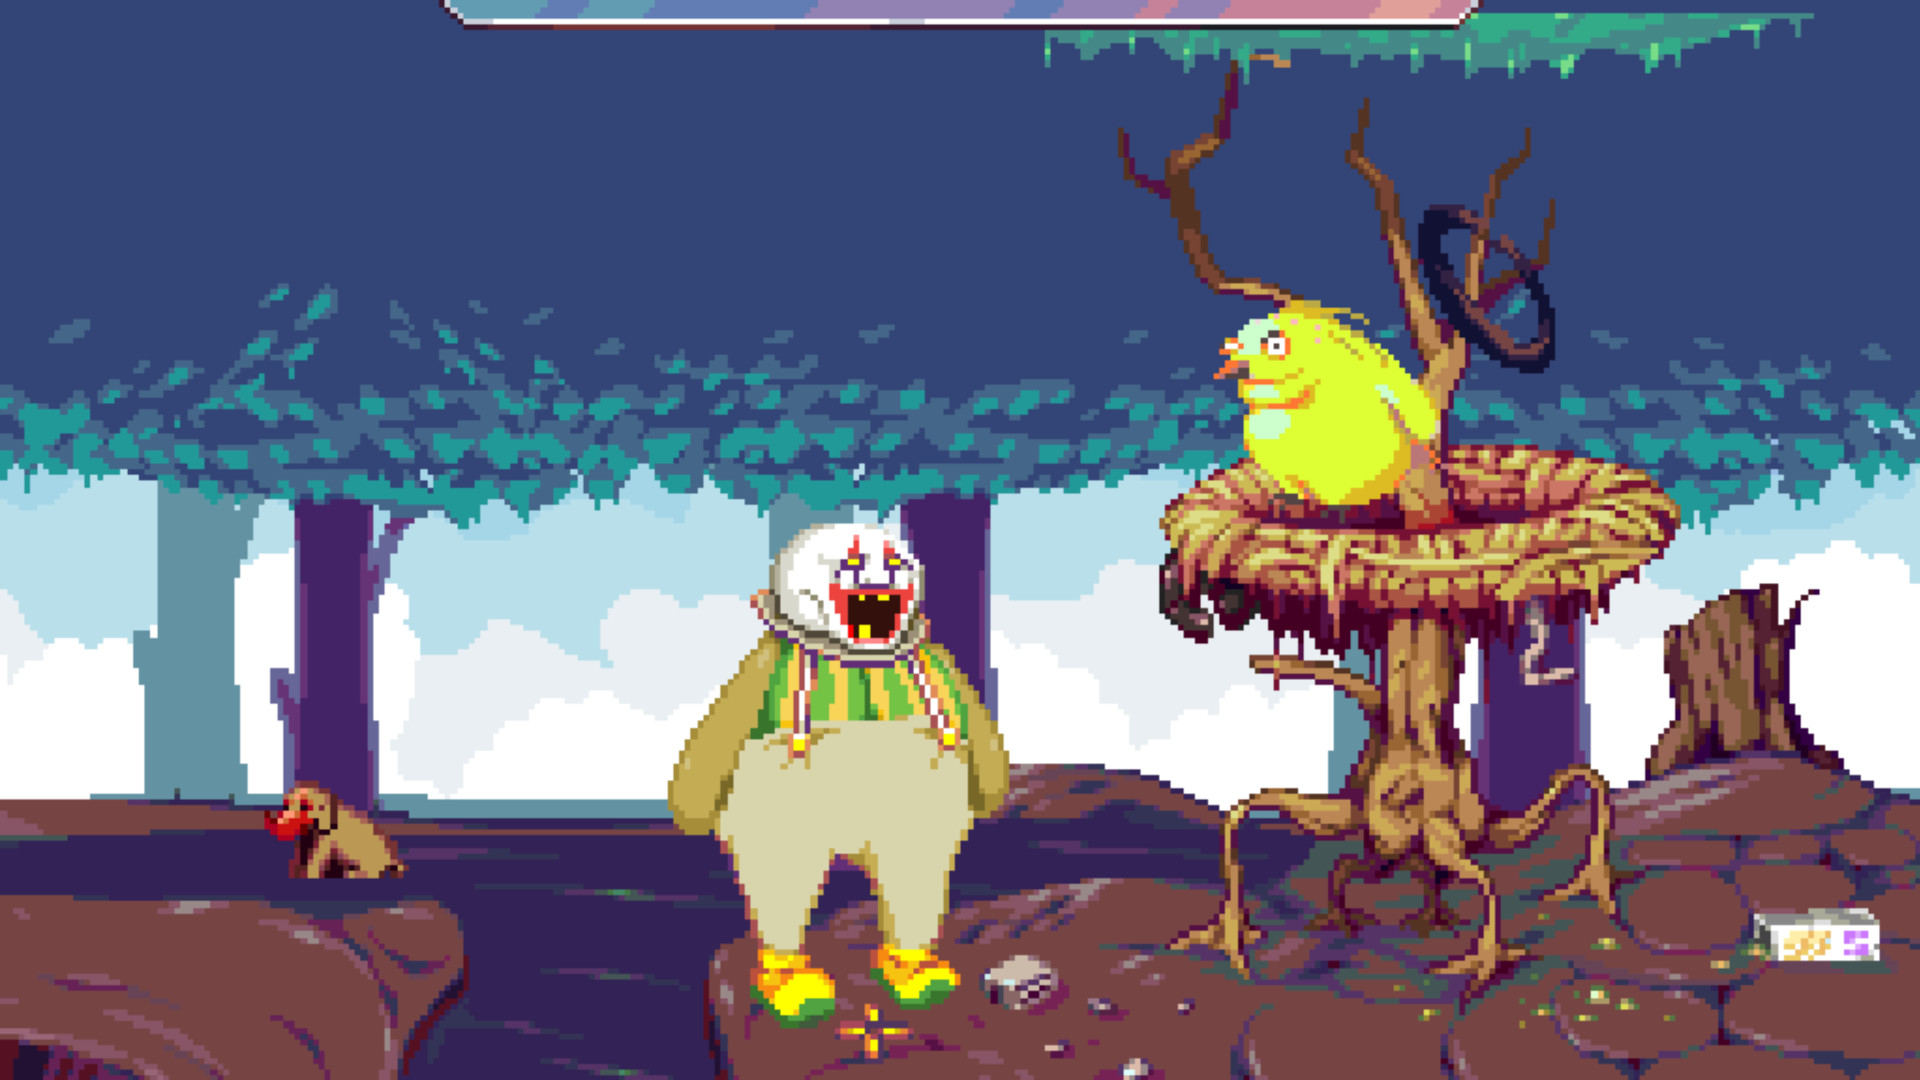 Uncomfortable clown hugging game Dropsy gets a Switch port